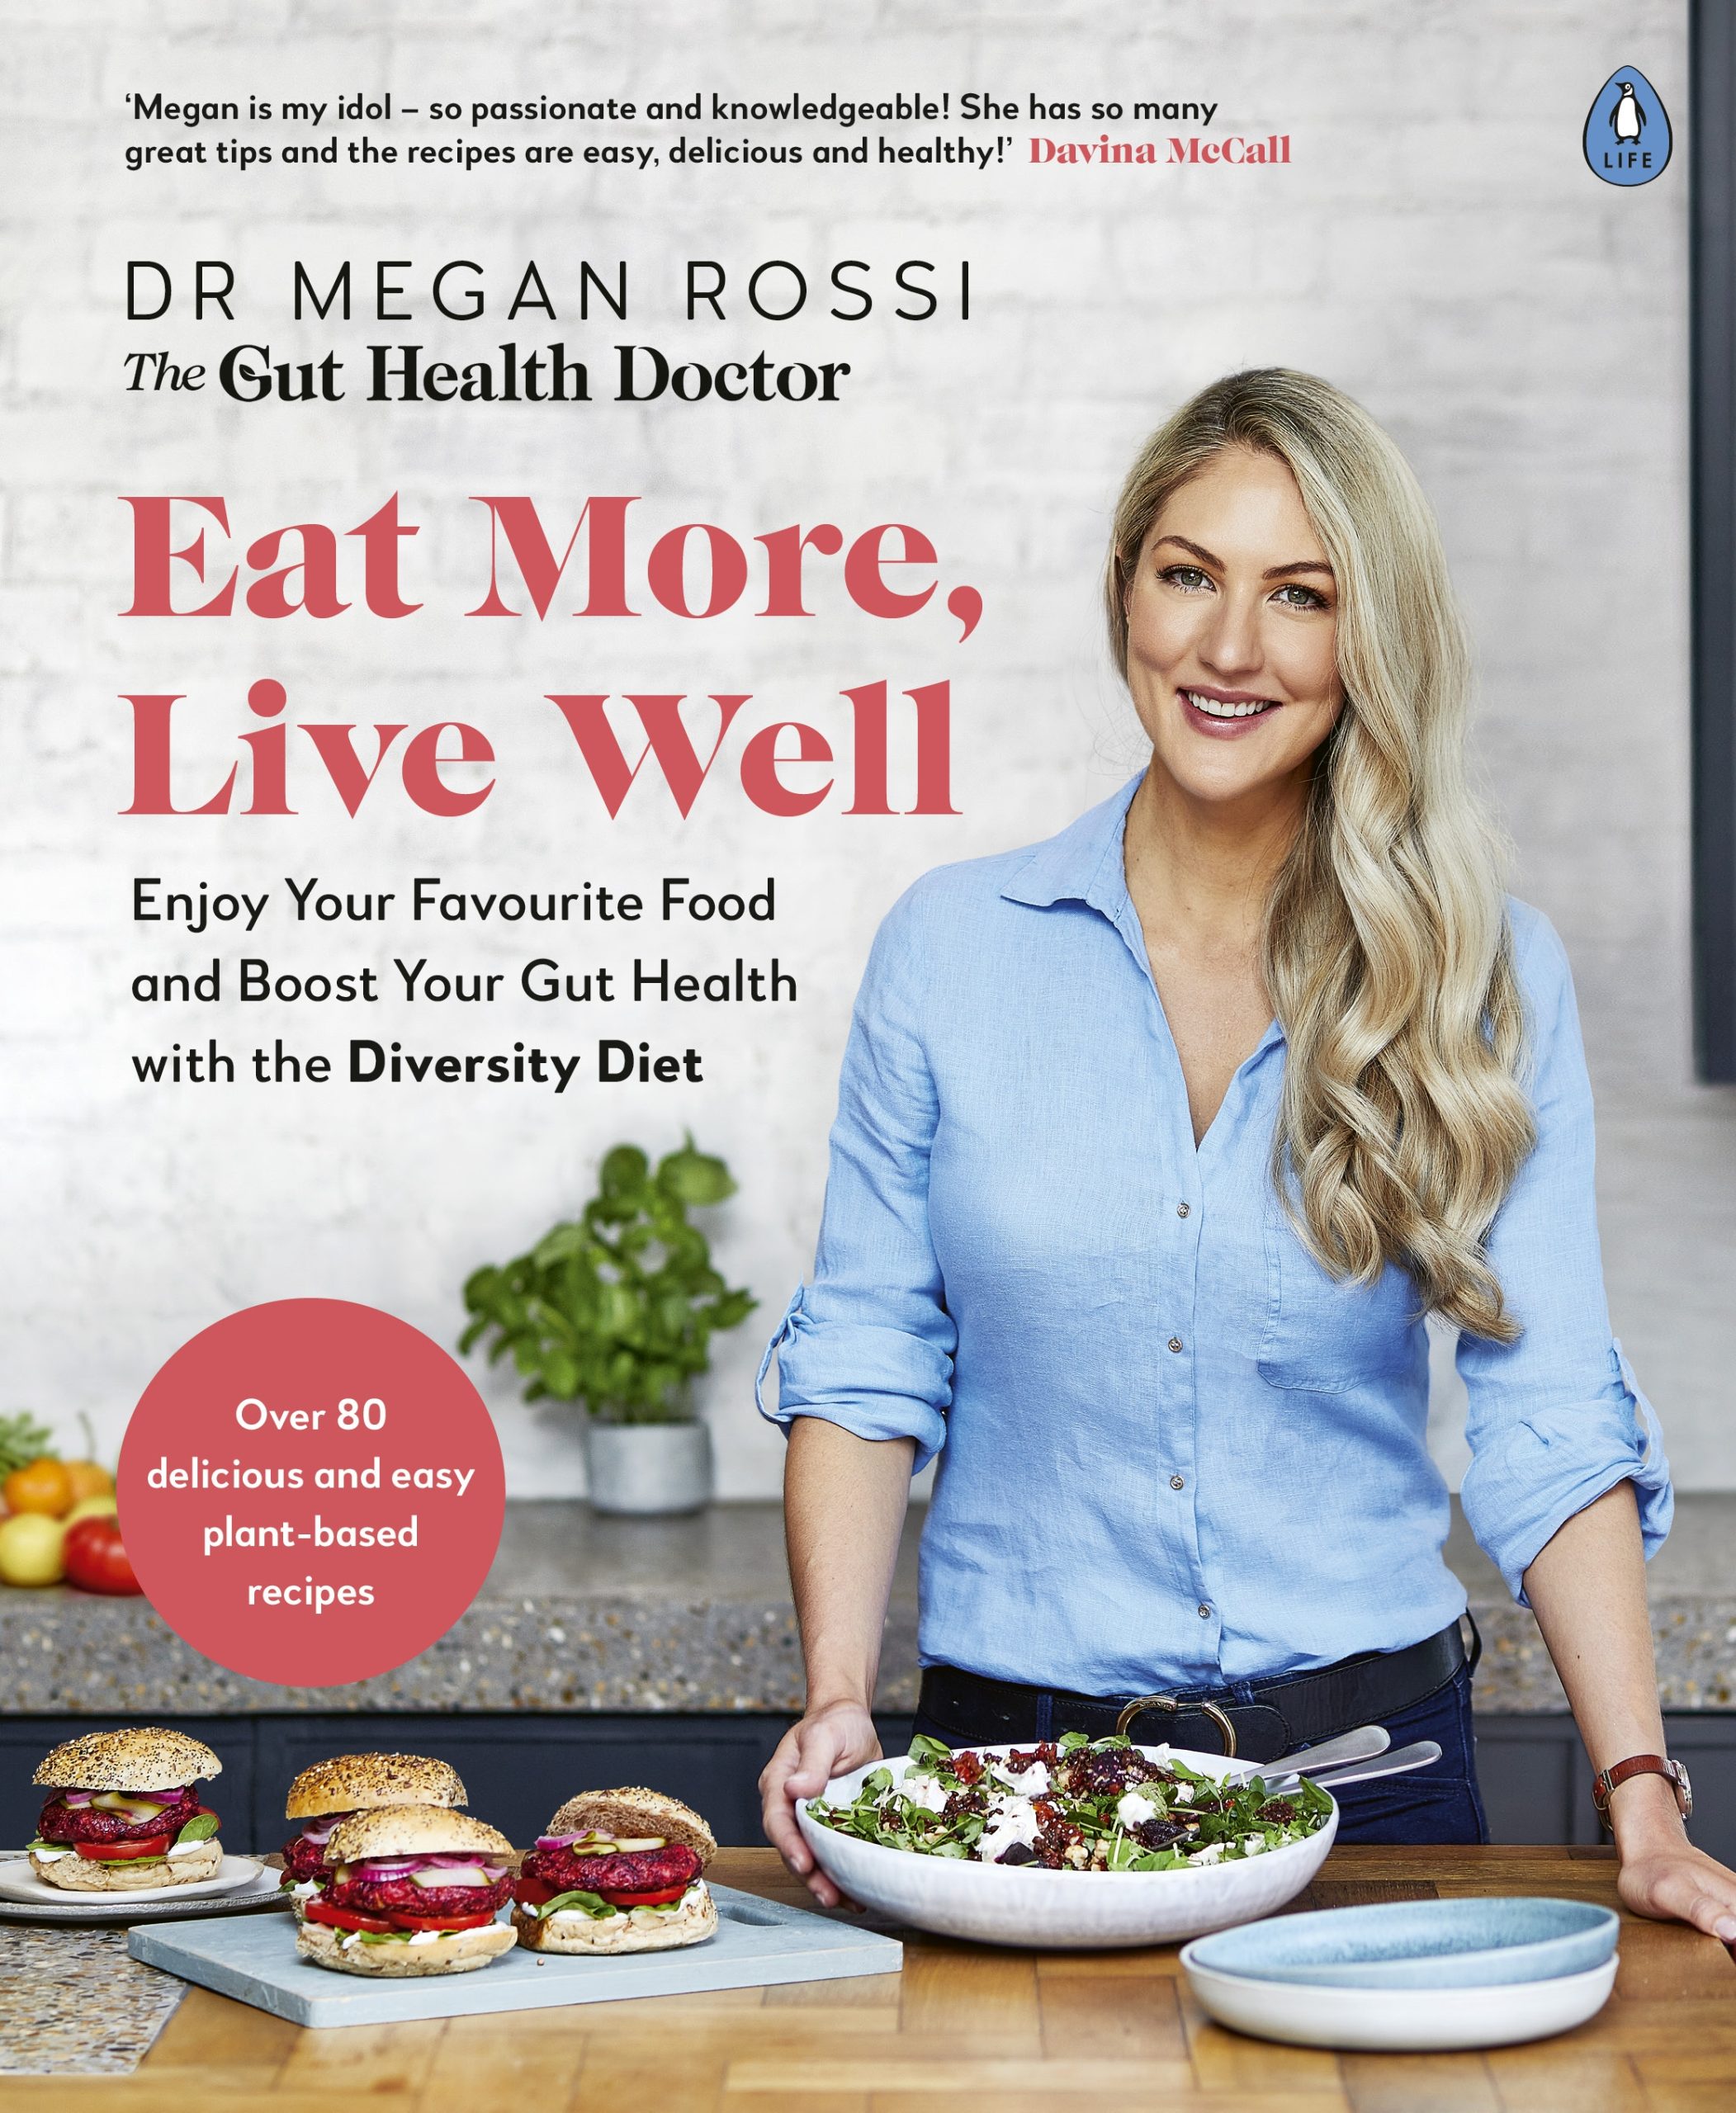 Cover of Eat More, Live Well, by Dr. Megan Rossi. Penguin Life, RRP AUD $35. Featuring Dr Rossi wearing a blue shirt standing in a kitchen with food in front of her.